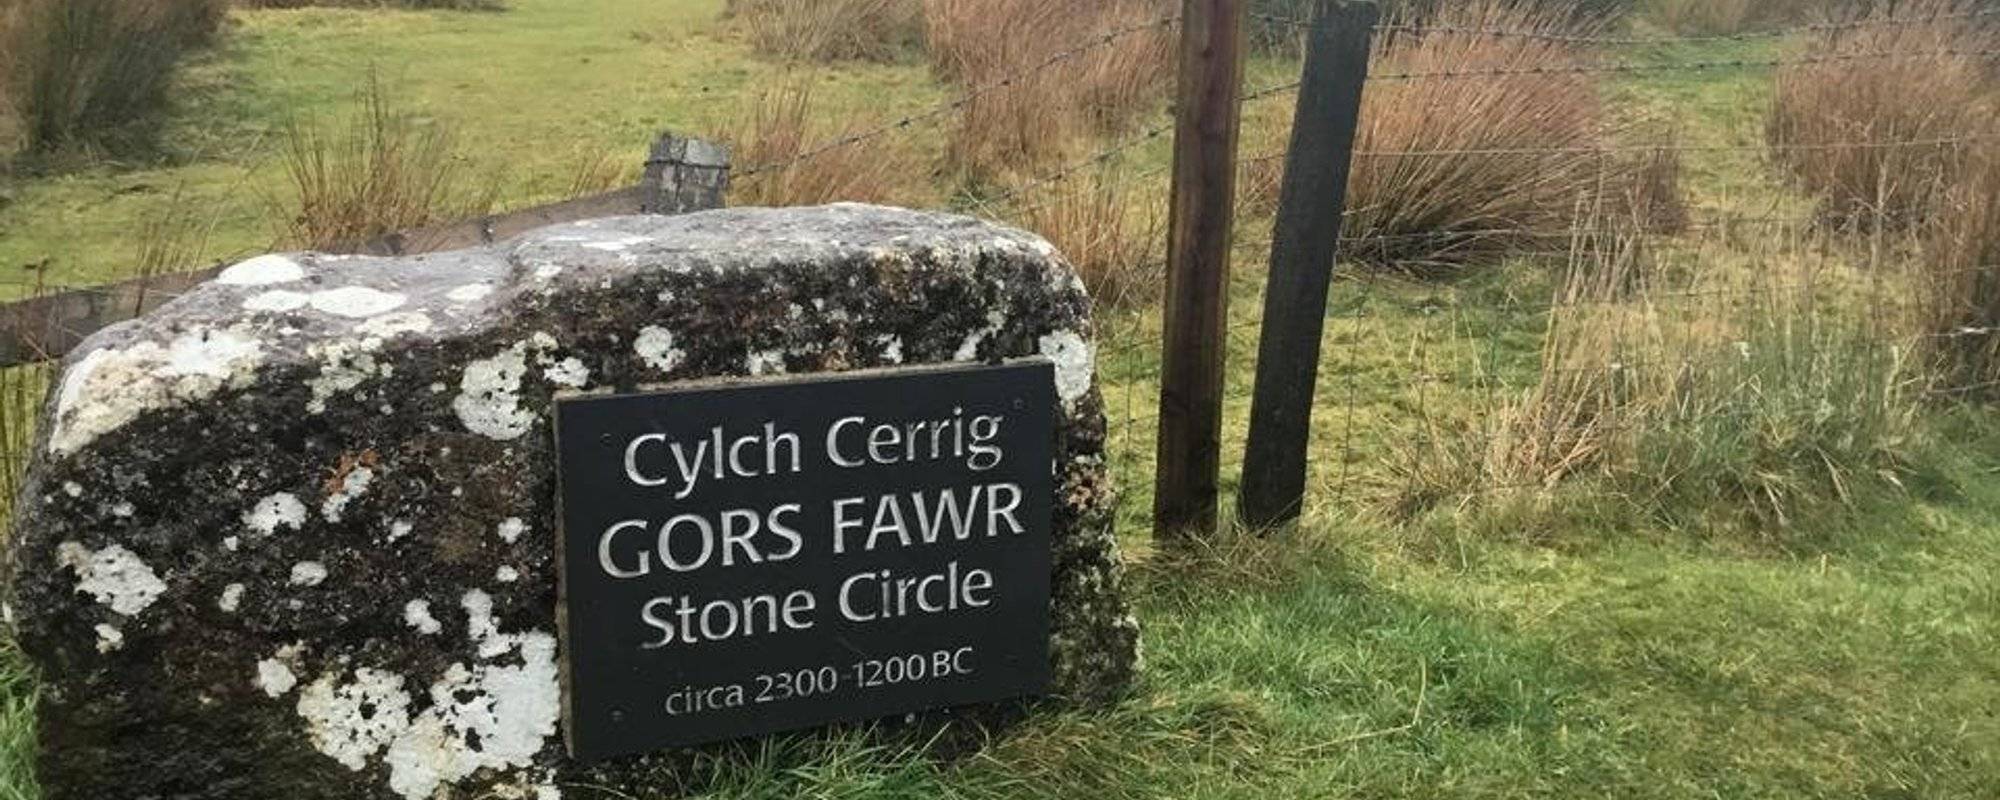 Gors Fawr, Wales. Where Stonehenge Came From.